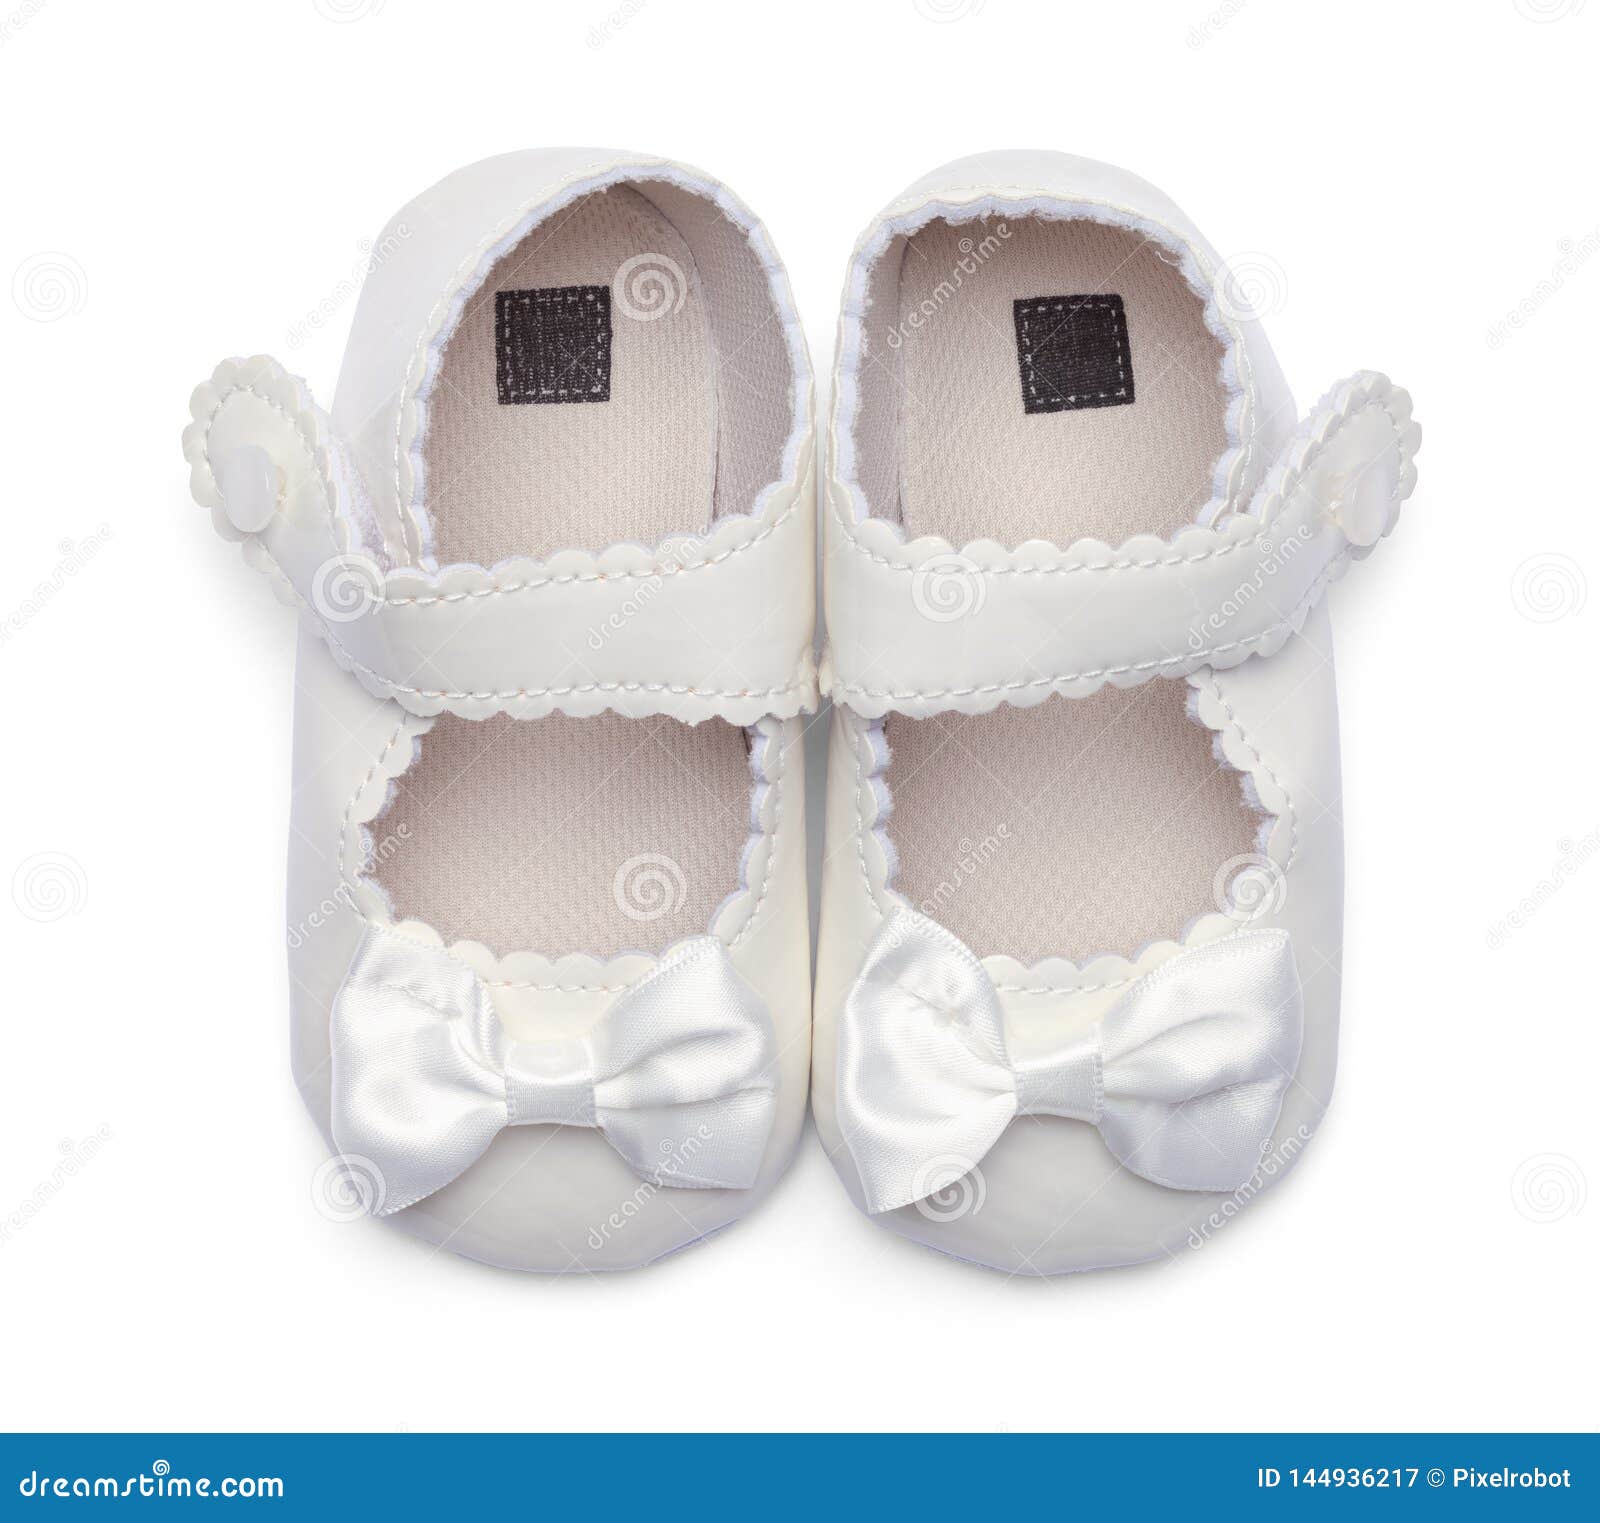 top baby shoes